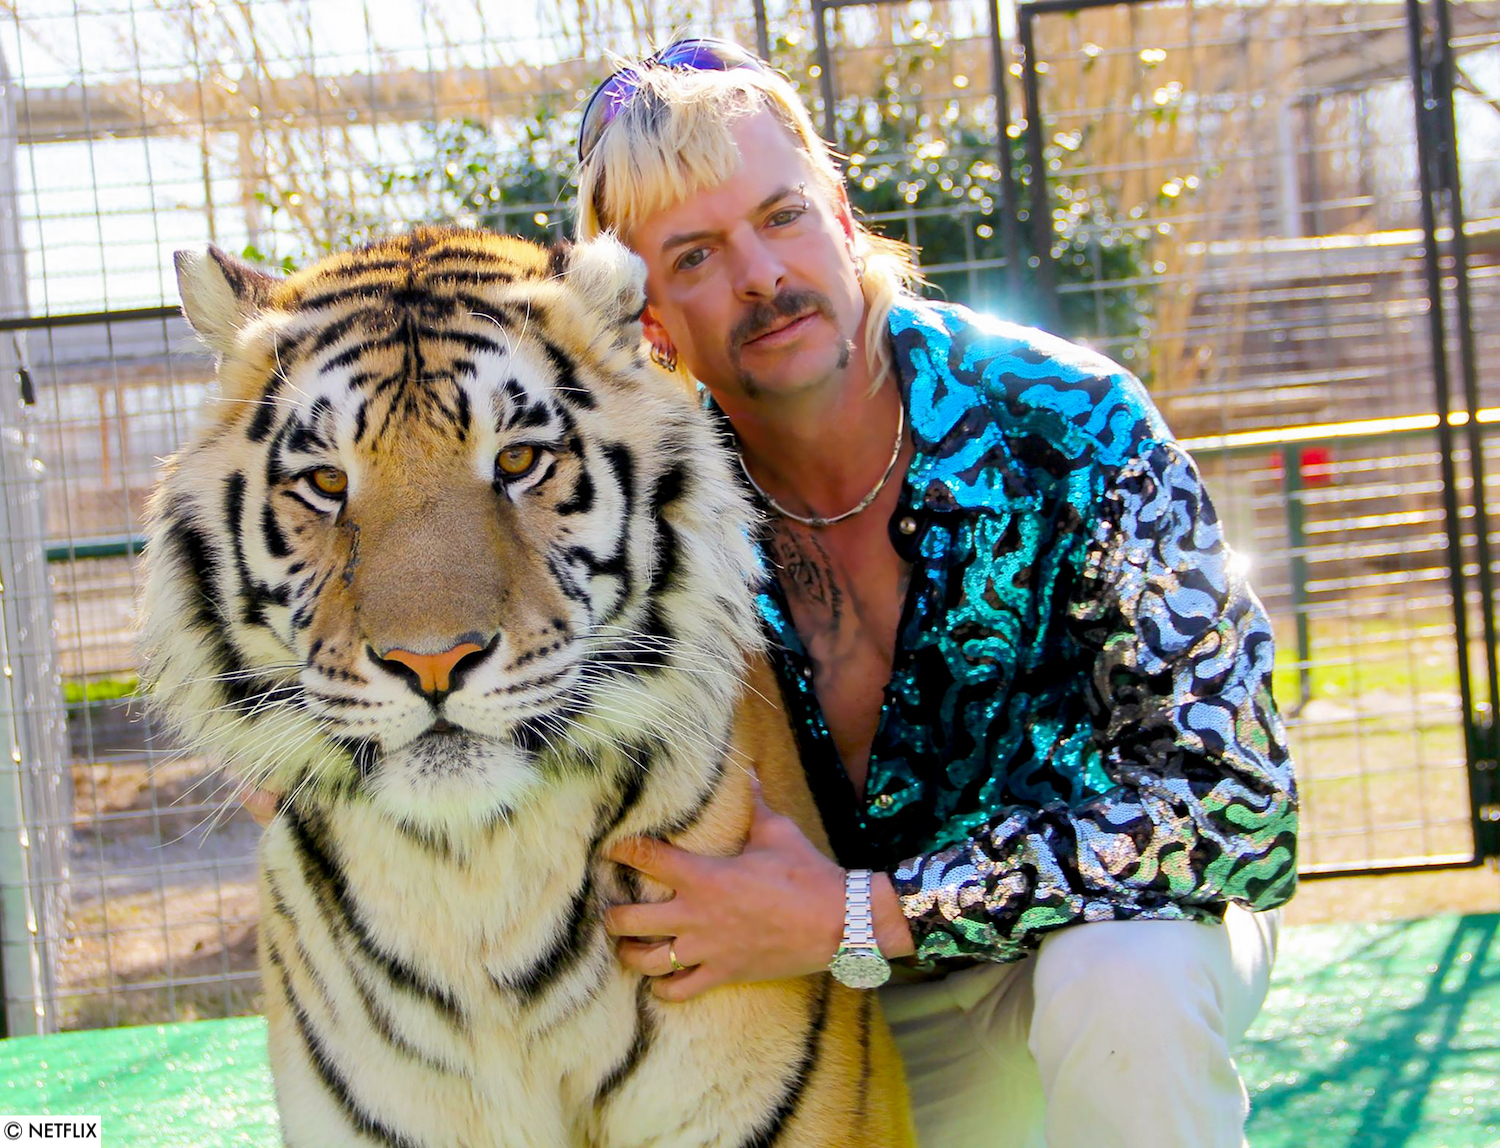 The mullet is on its way back in thanks to lockdown and Joe Exotic